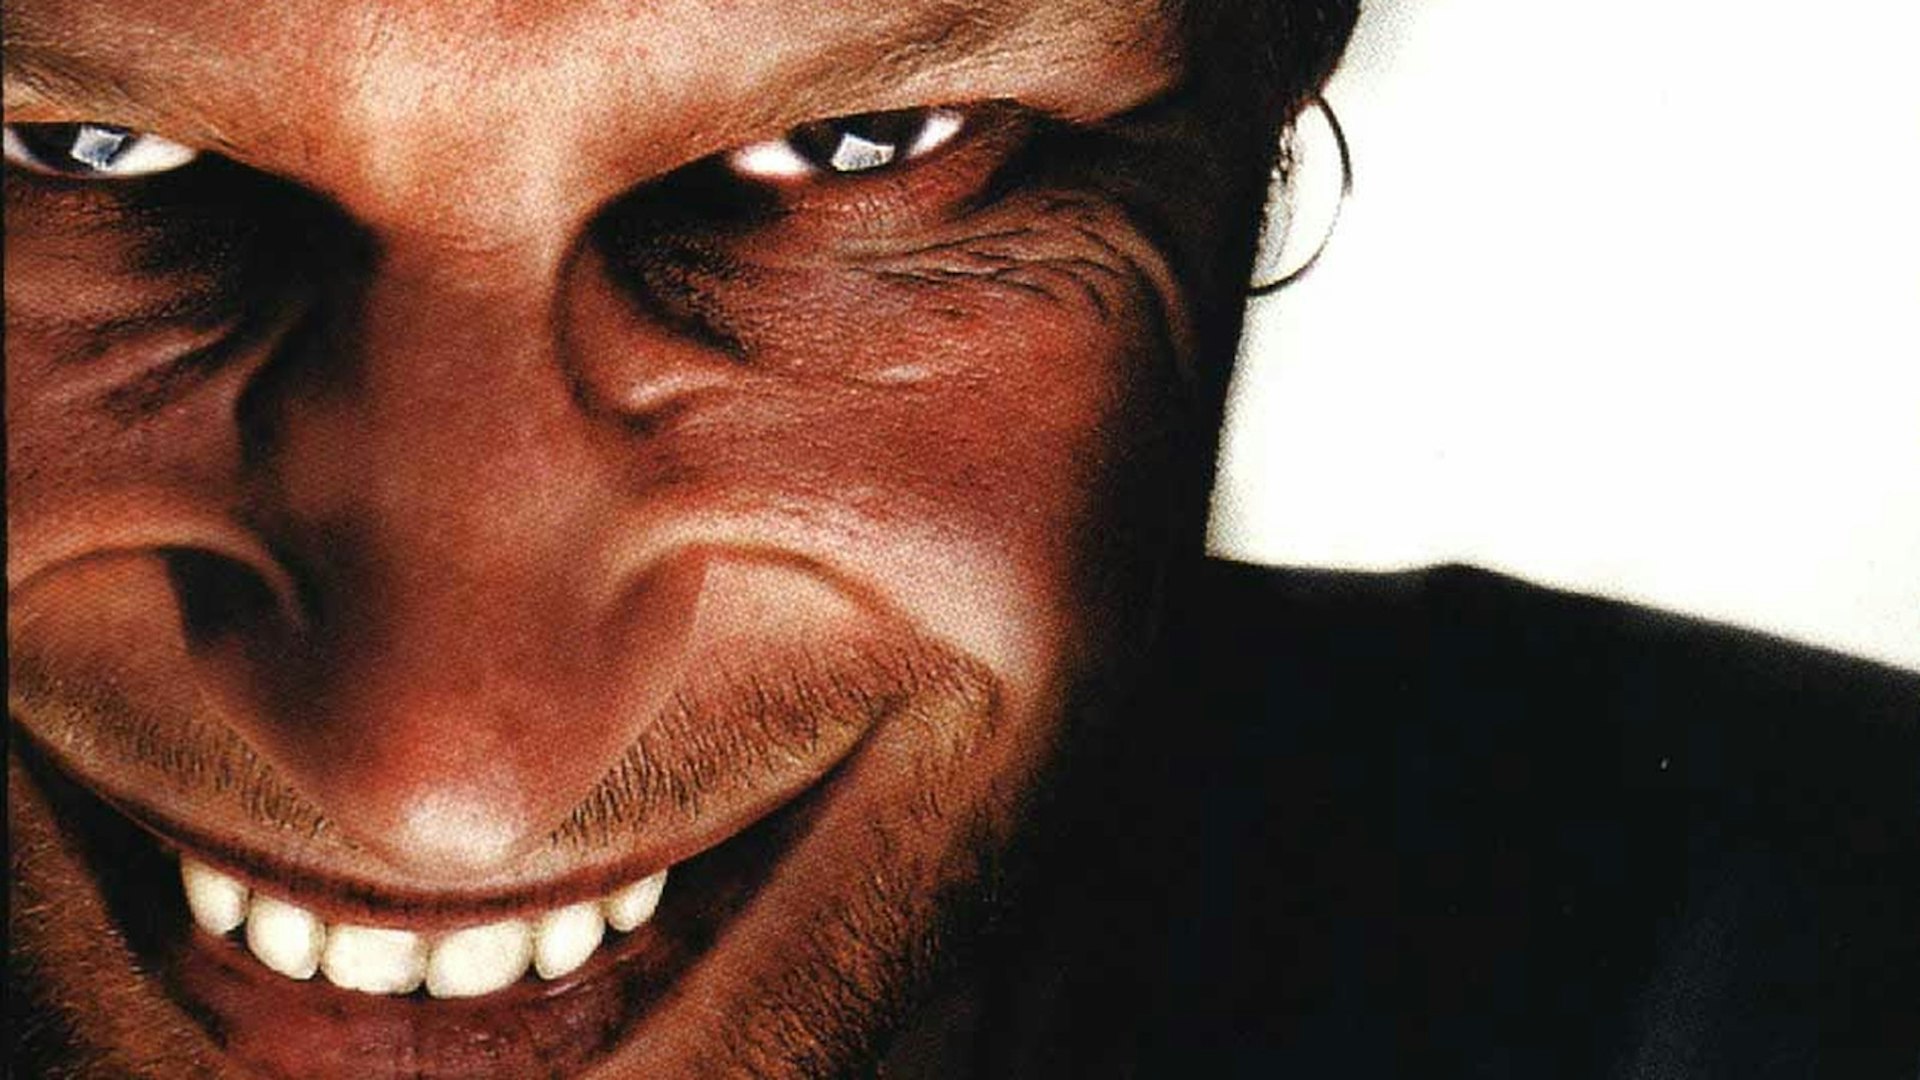 The mad extraterrestrial power of Aphex Twin